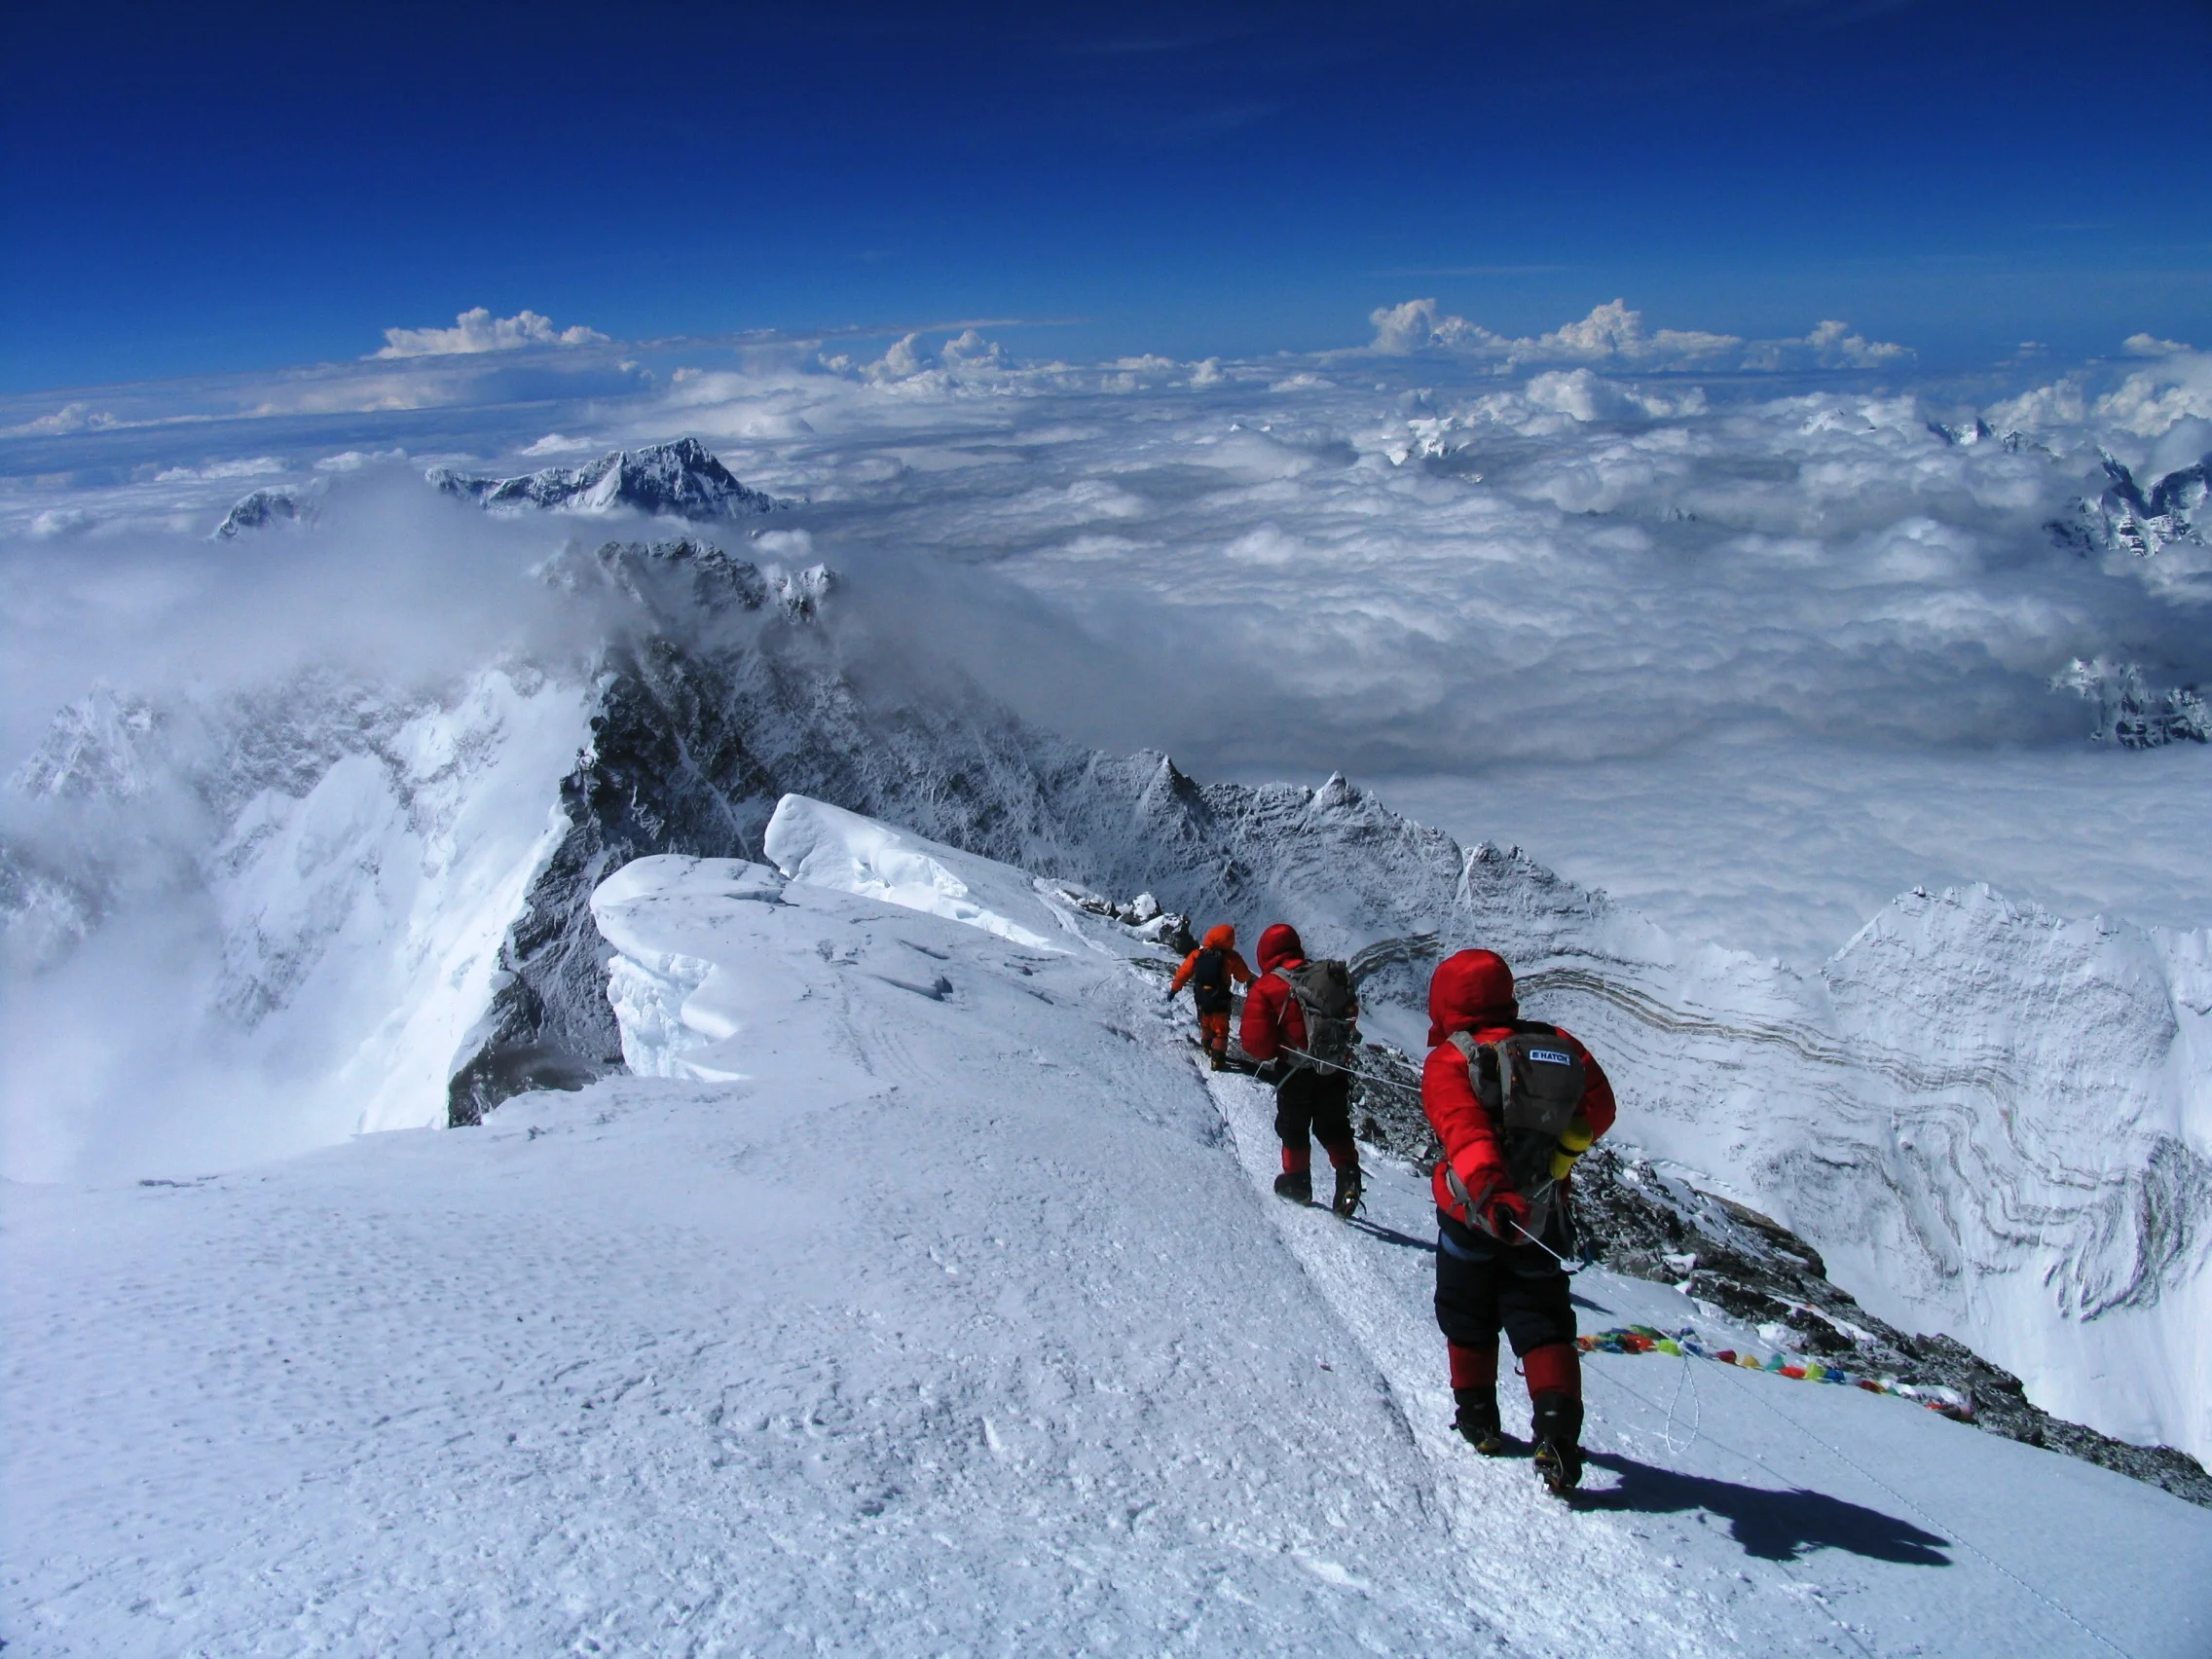 Alan Mallory with his father and brother descending from the summit of Everest